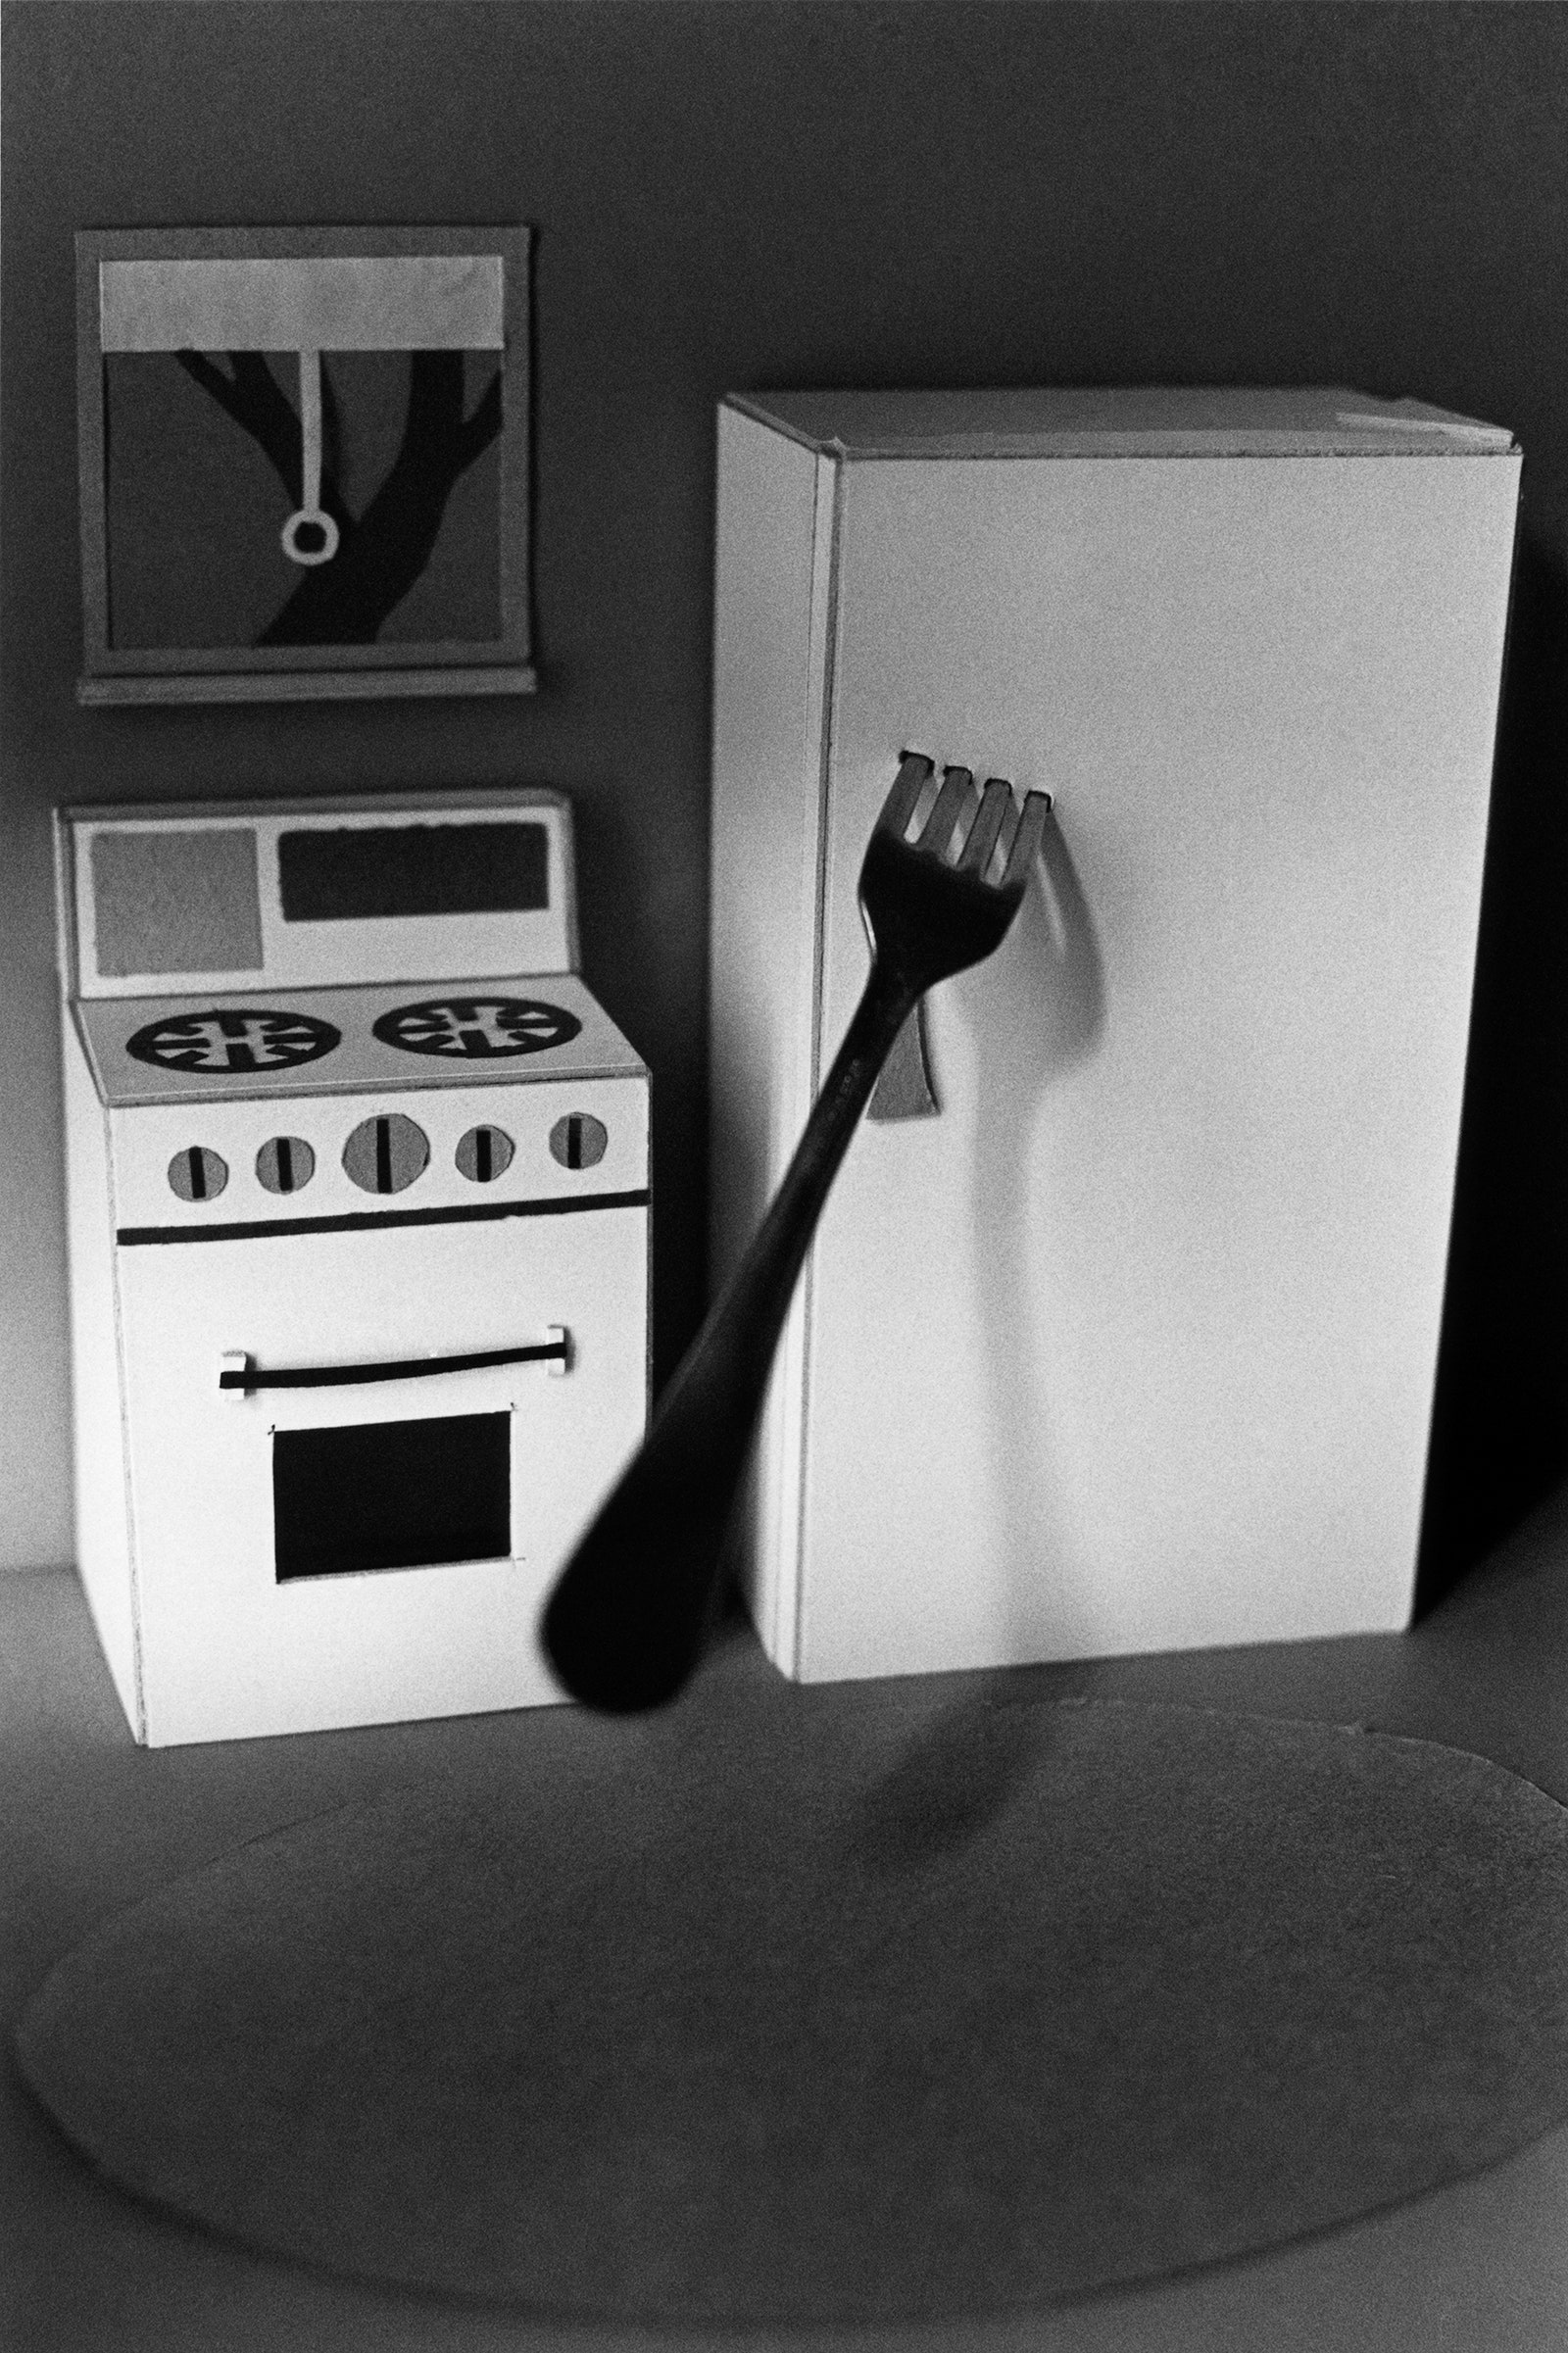 A paper model of a kitchen.